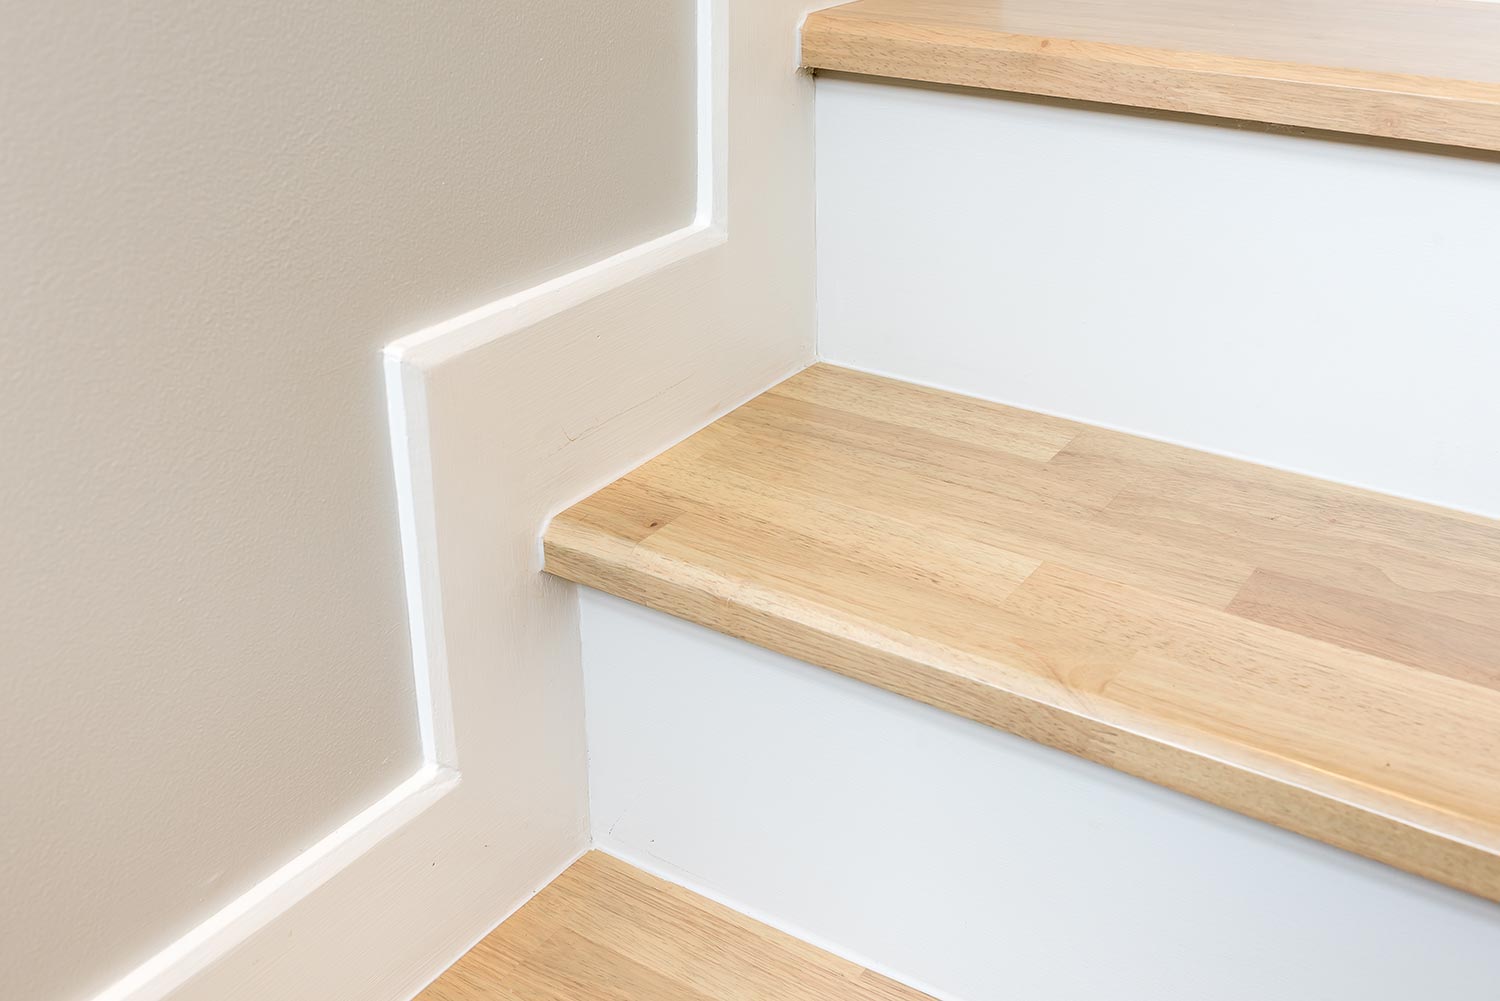 Modern stair design with wooden tread and white riser